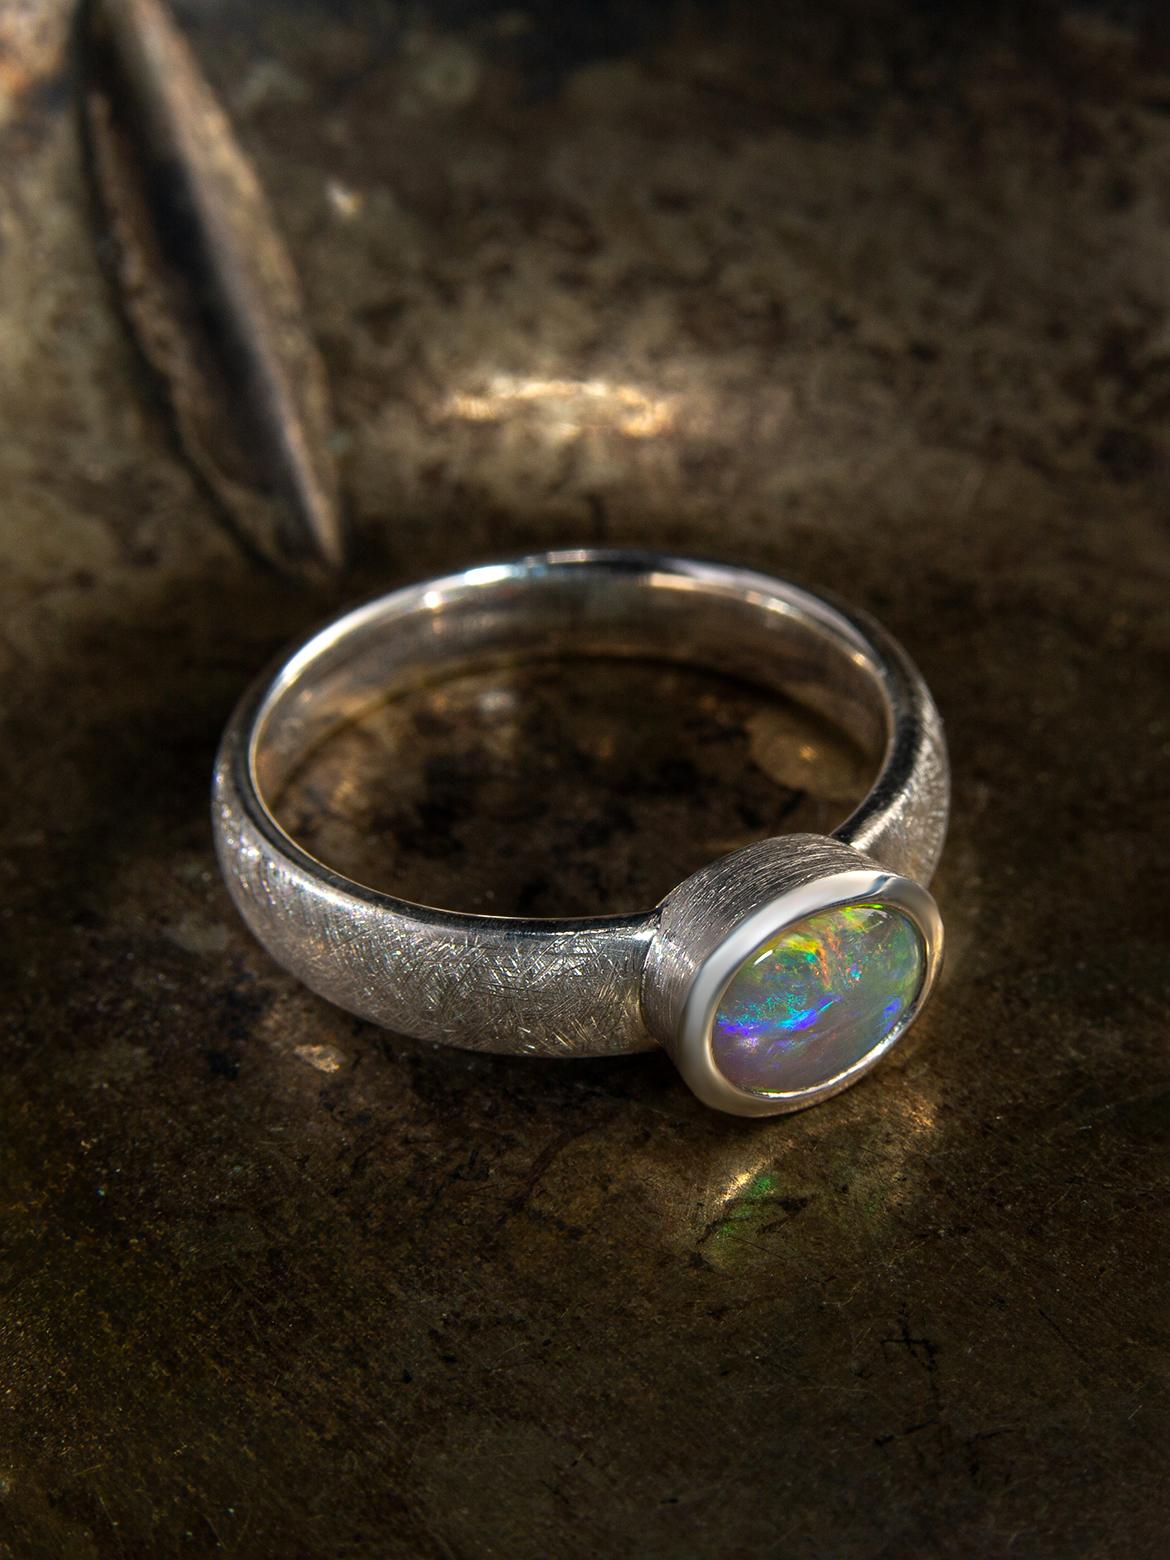 Sterling silver ring with natural Opal
opal origin - Australia
weight of the ring - 5.2 grams
stone measurements: 0.24 x 0.28 in / 6 х 7 mm
ring size - 8.25 US / 58 EU
ref No 2465